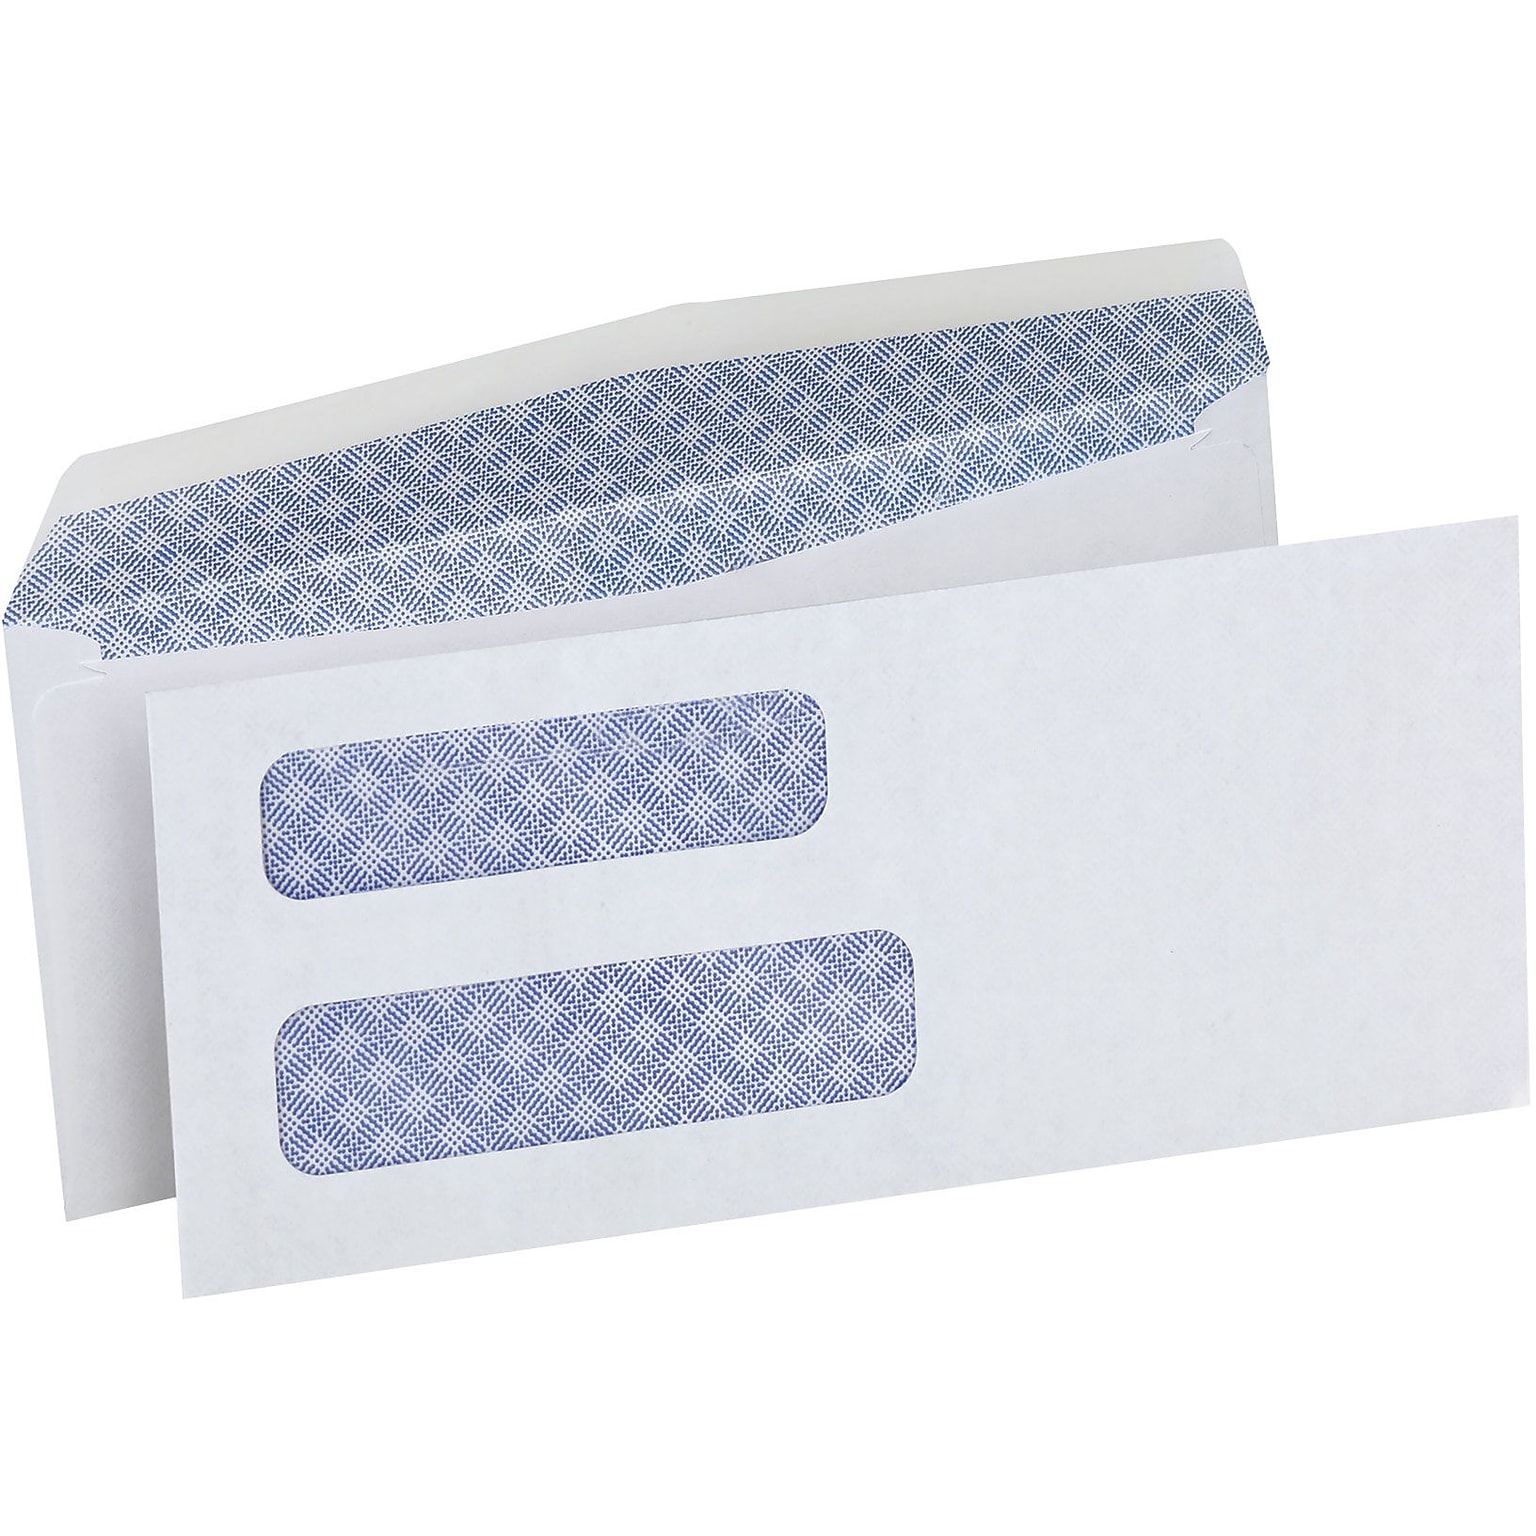 Quill Brand Gummed Security Tinted #8 Double Window Envelope, 3 5/8 x 8 5/8, White, 500/Box (69741 / 70727)